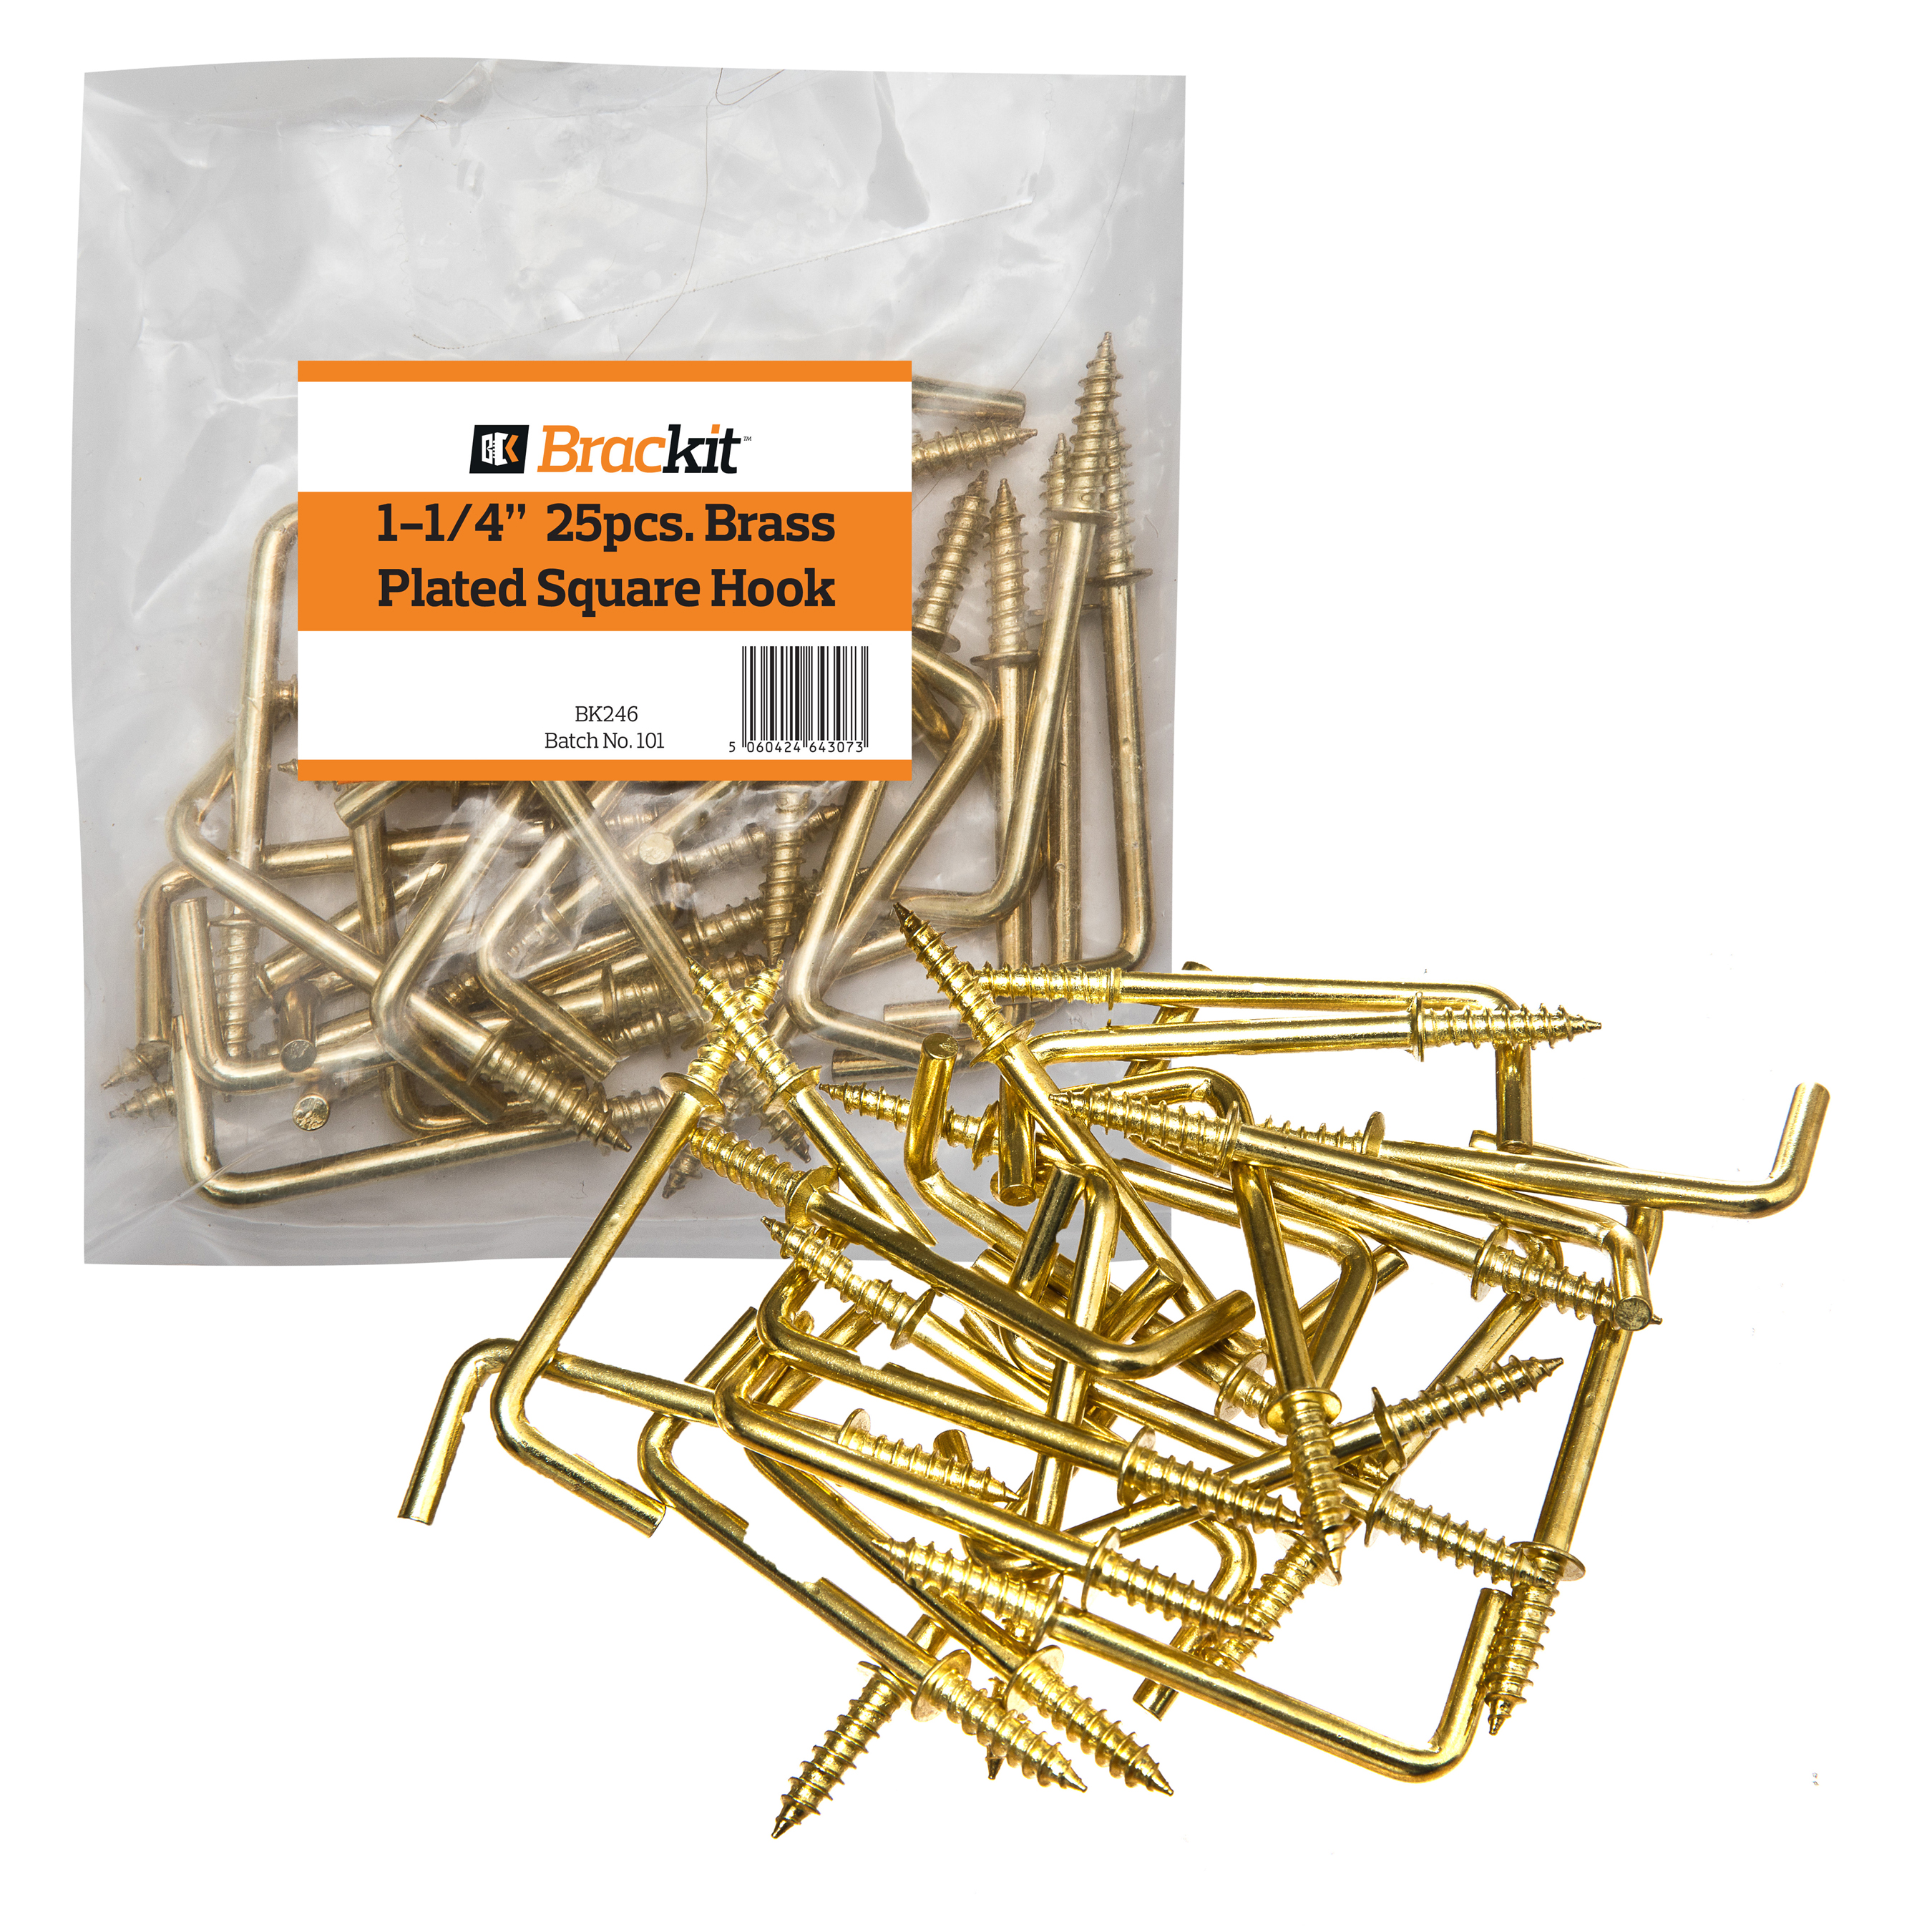 25 x 32mm (1-1/4”in) Brass-Plated Square Shouldered Dresser Hooks – Simple To Install Tapered Screw Head For Easy Installation Into Wood